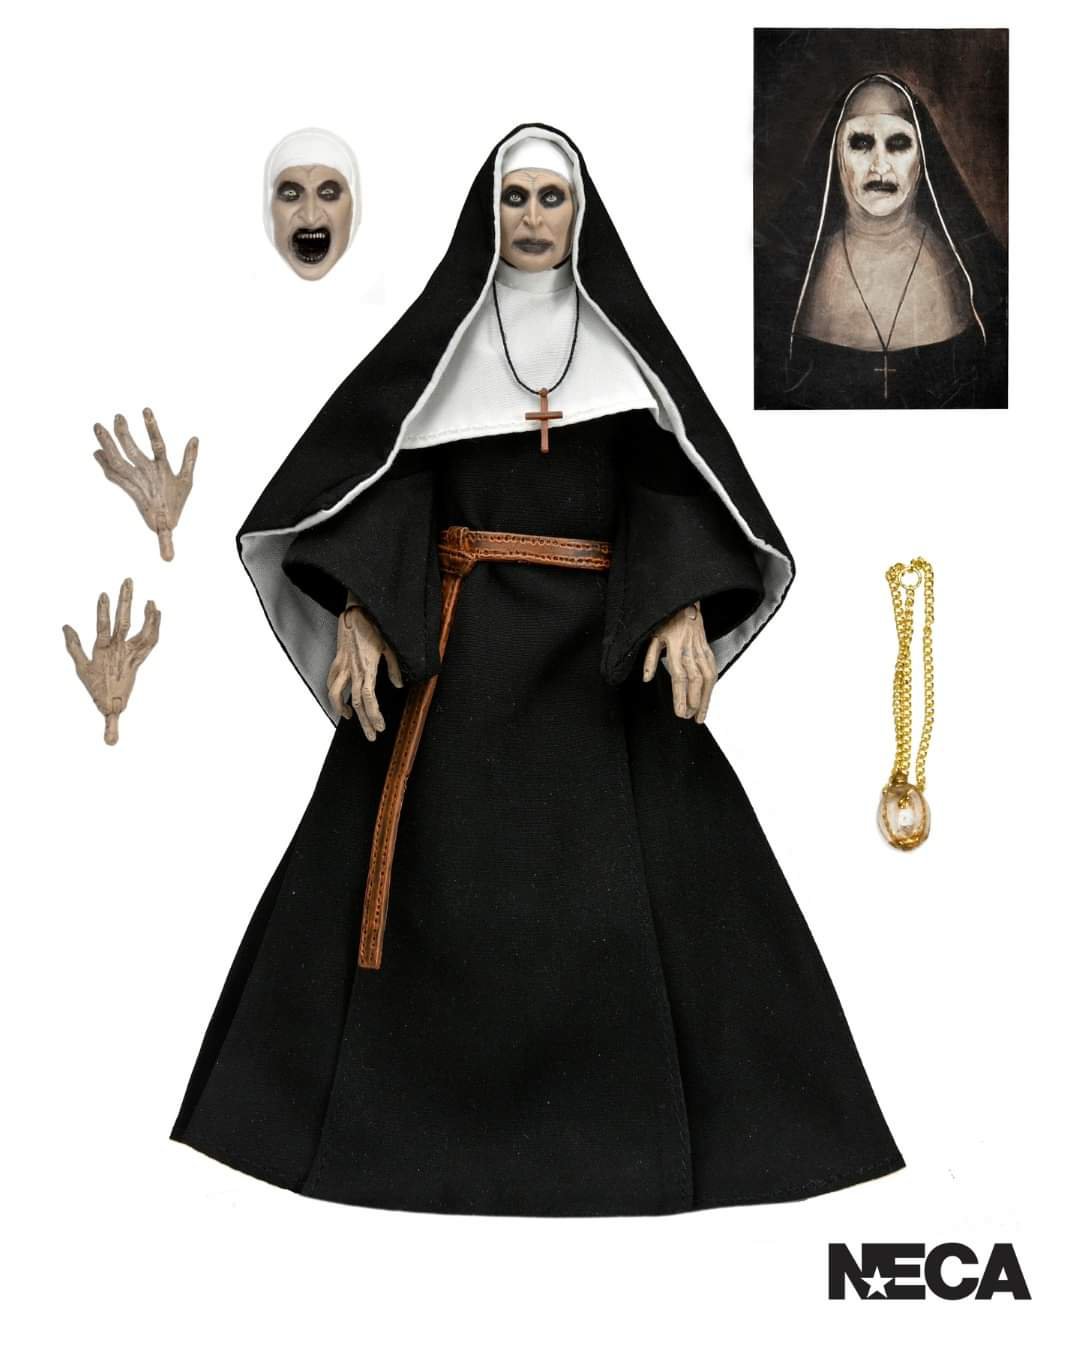 PREORDER Neca The Conjuring Universe 7” Scale Action Figure Ultimate The Nun [Valak] (May